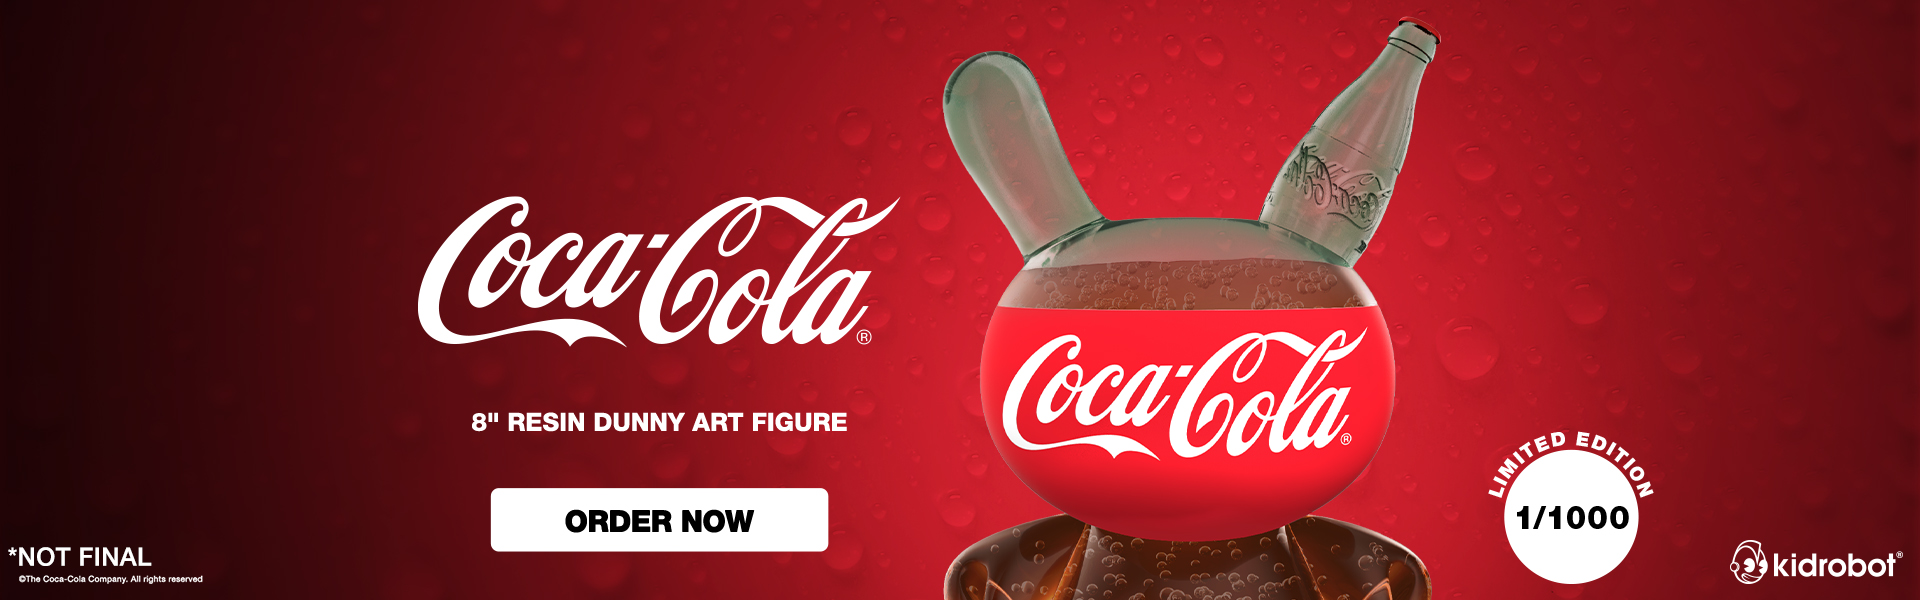 Limited Edition Kidrobot x Coca-Cola Resin Dunny Drops for Pre-order on Kidrobot.com - Limited Edition of 1000